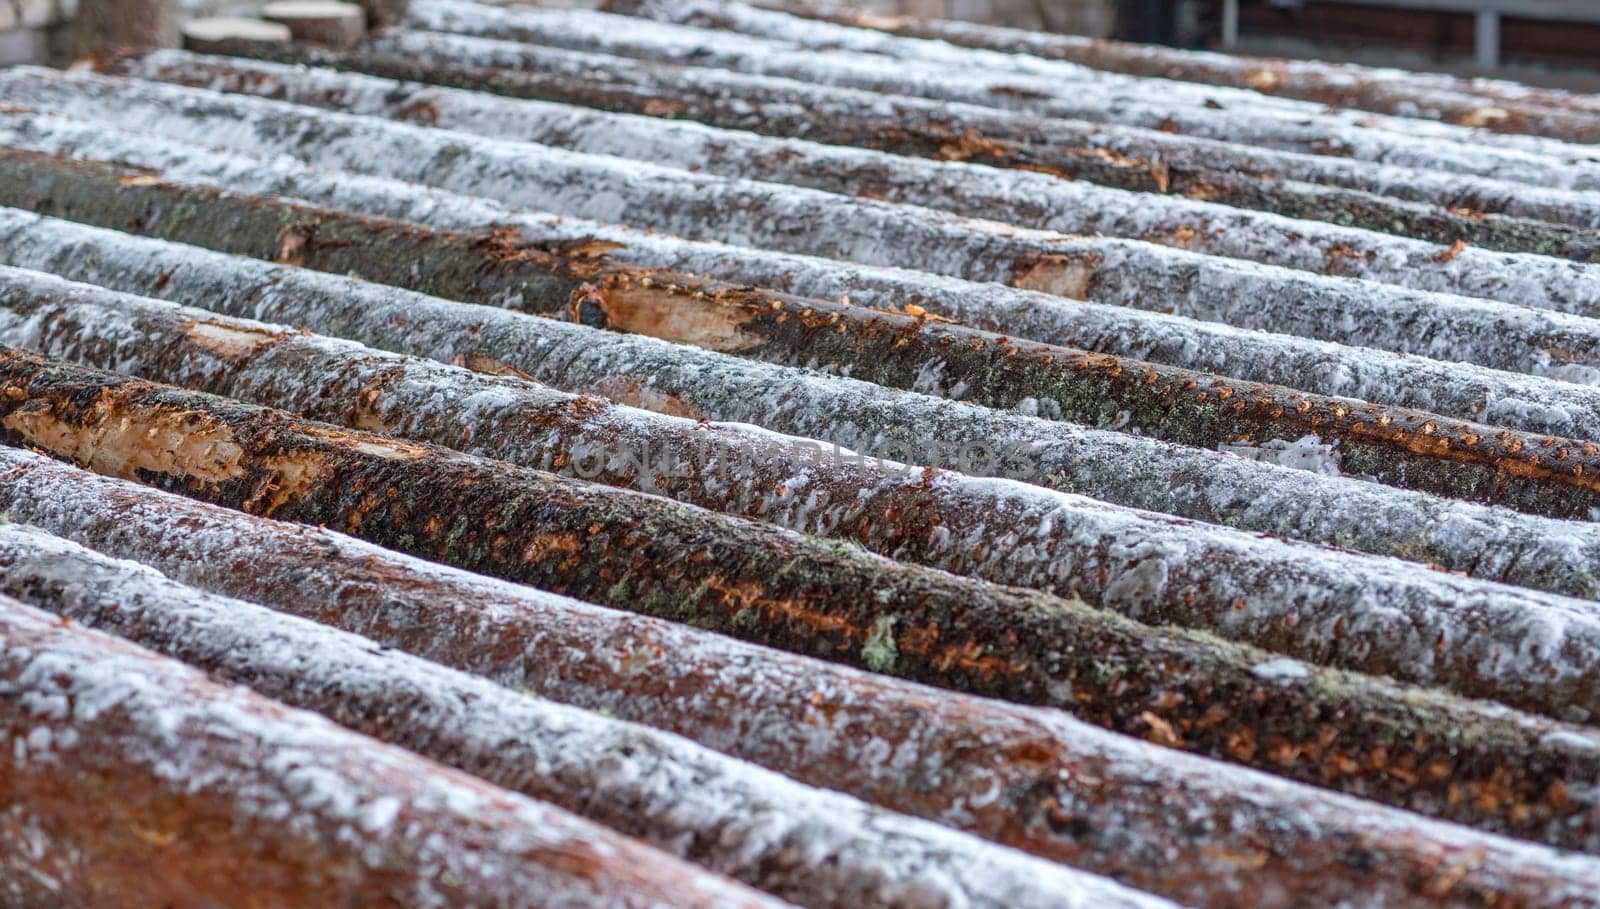 Image of many snow-covered logs at sawmill